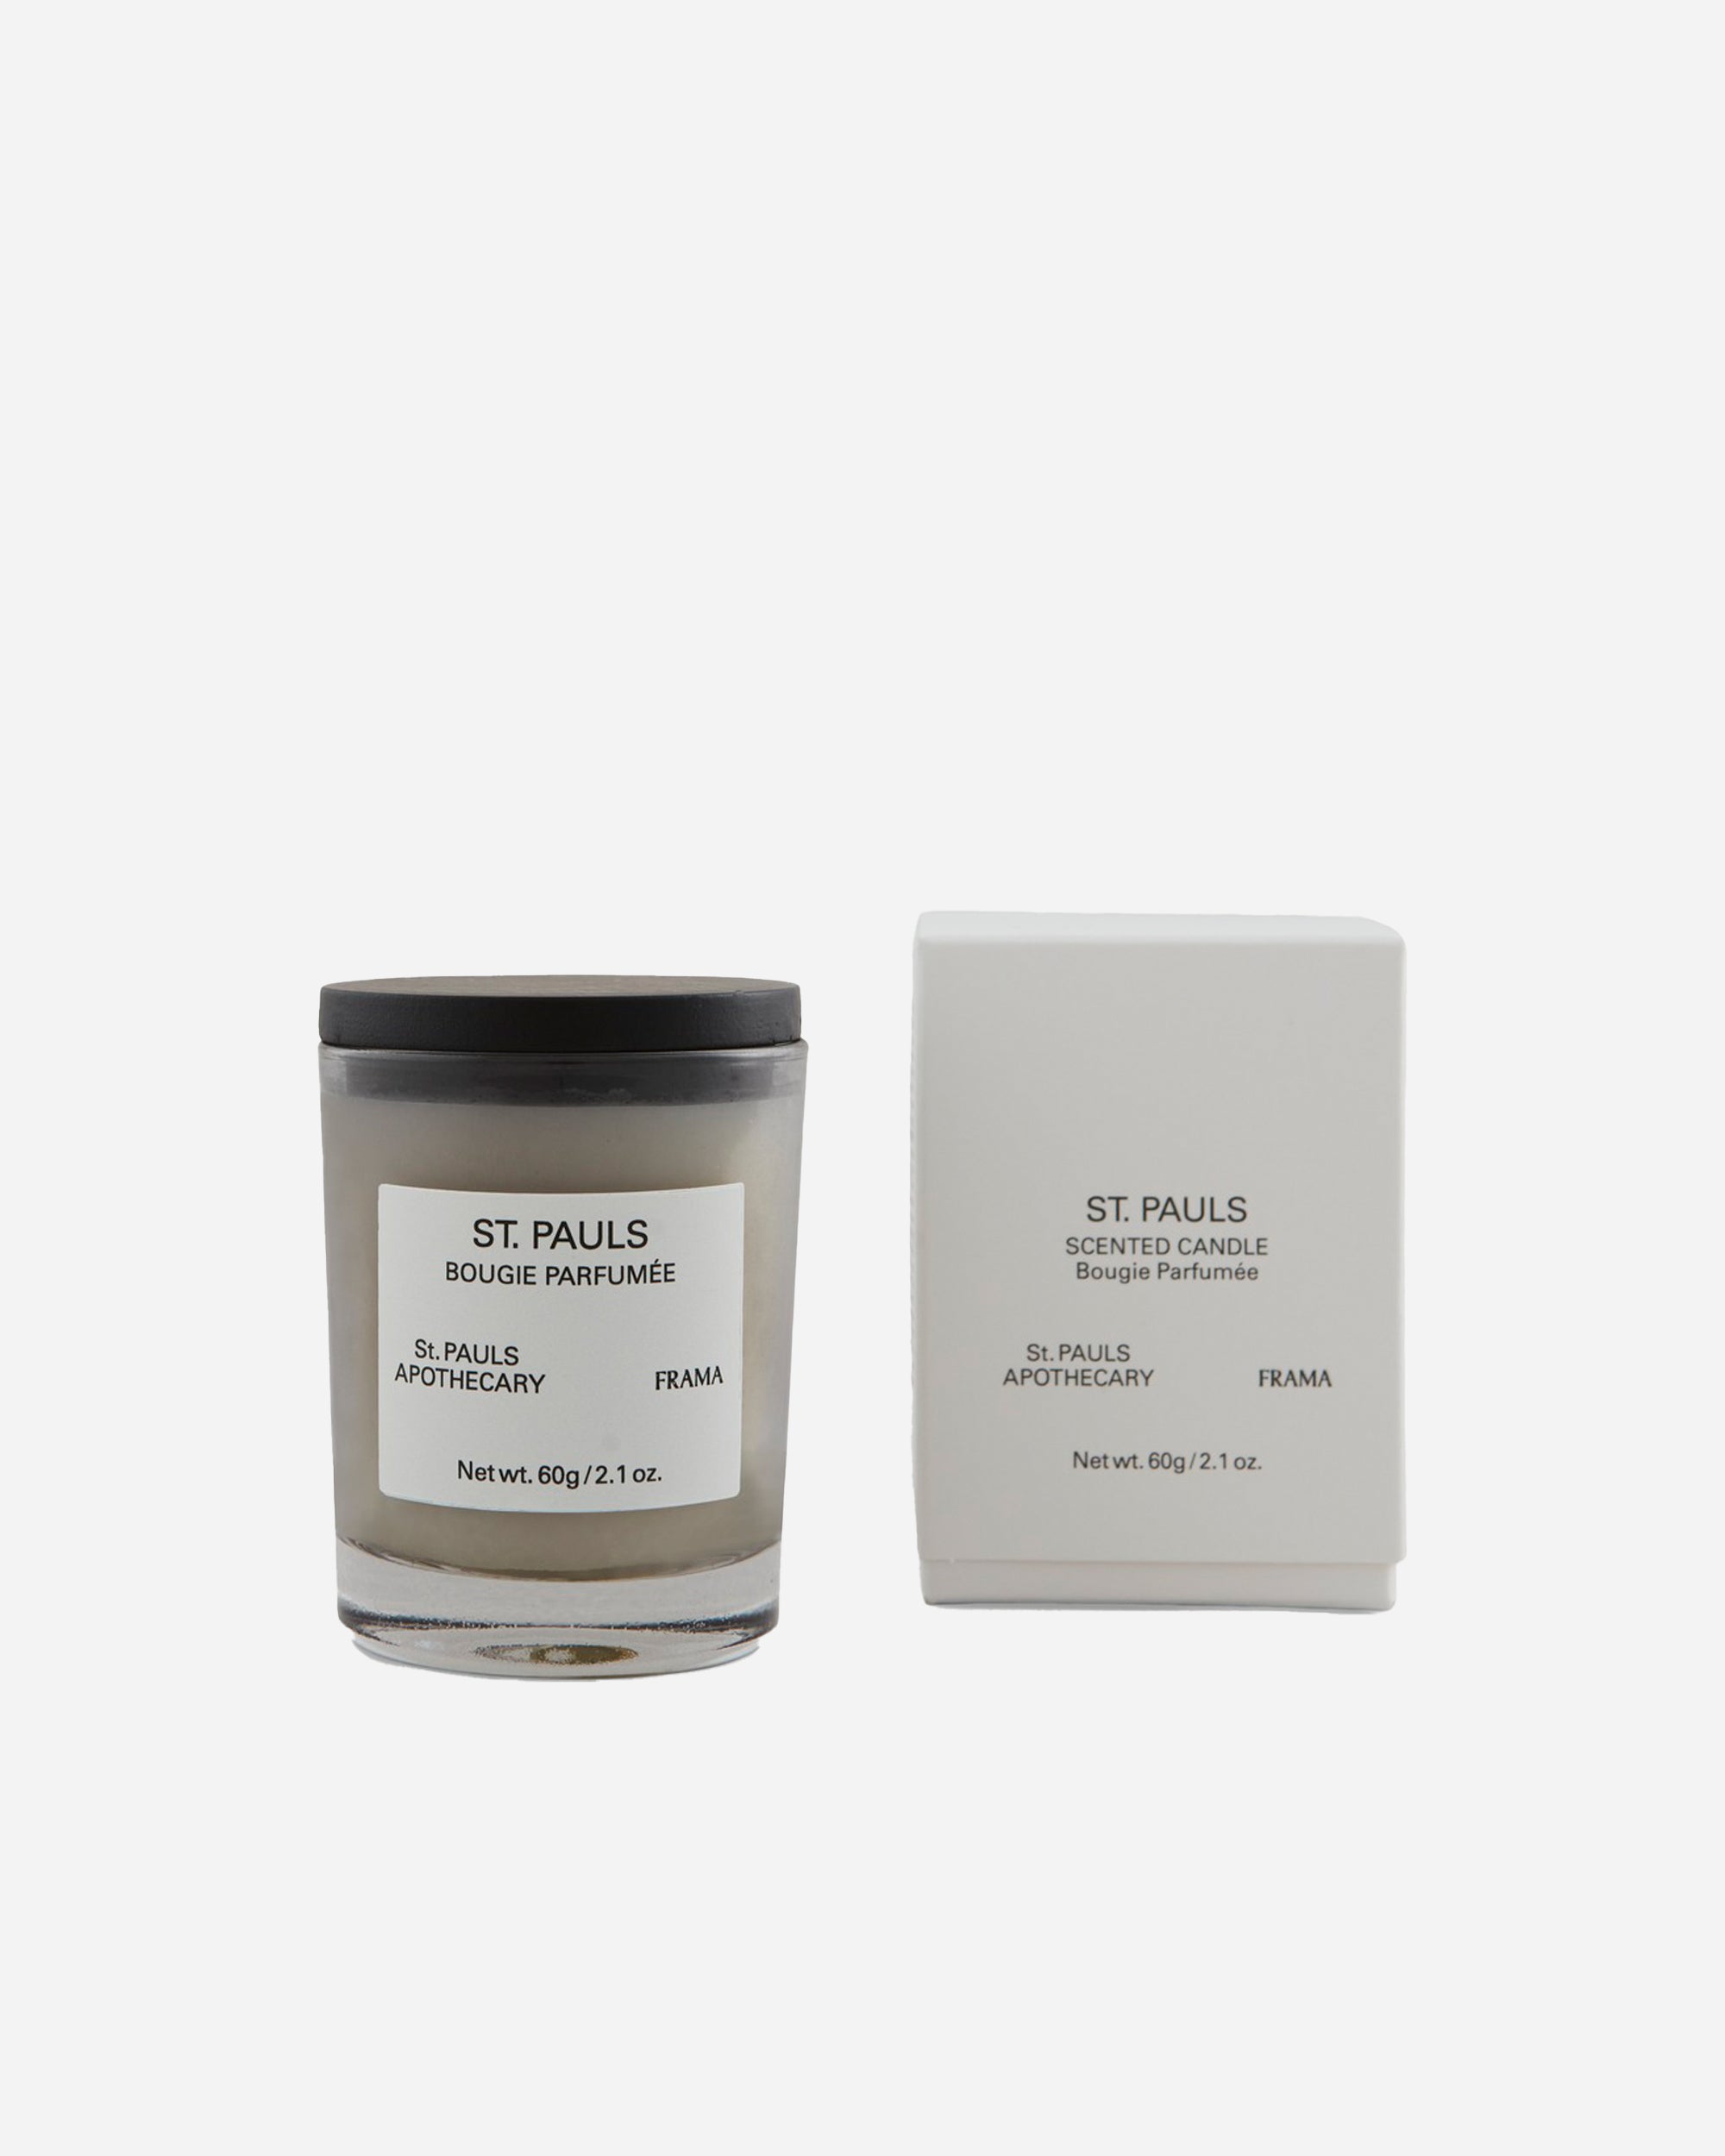 St. Pauls | Scented Candle 60g